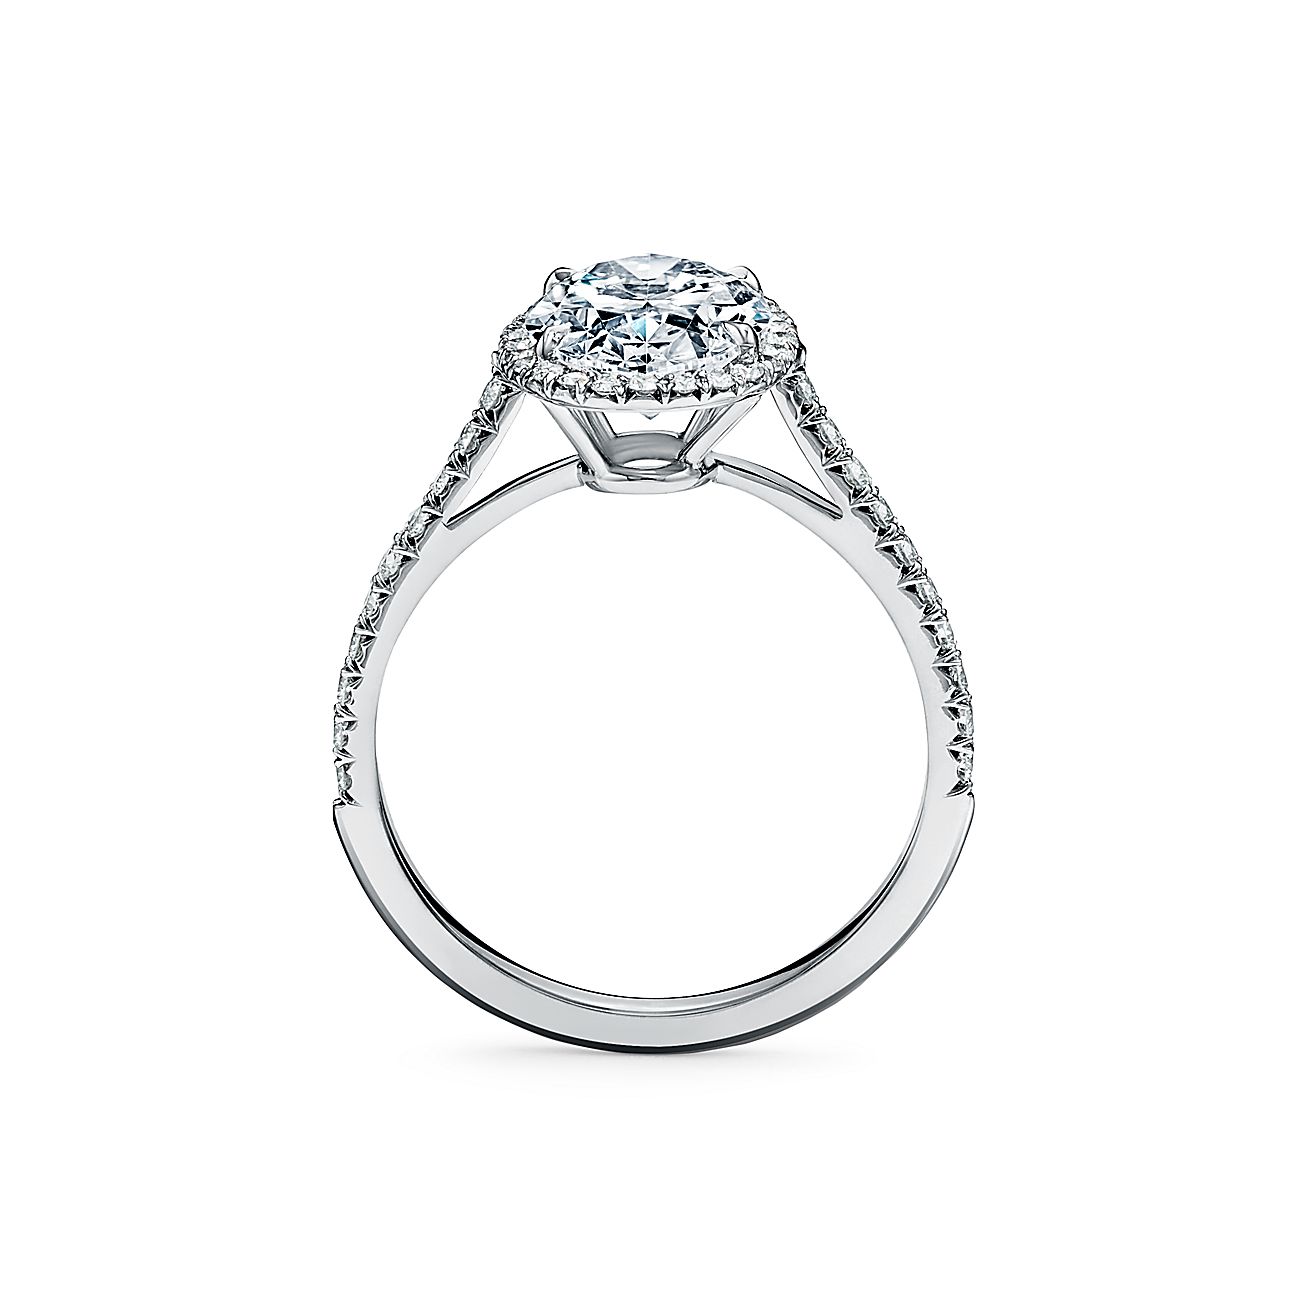 Tiffany Soleste® Oval Halo Engagement Ring With A Diamond Band In Platinum.  | Tiffany & Co.